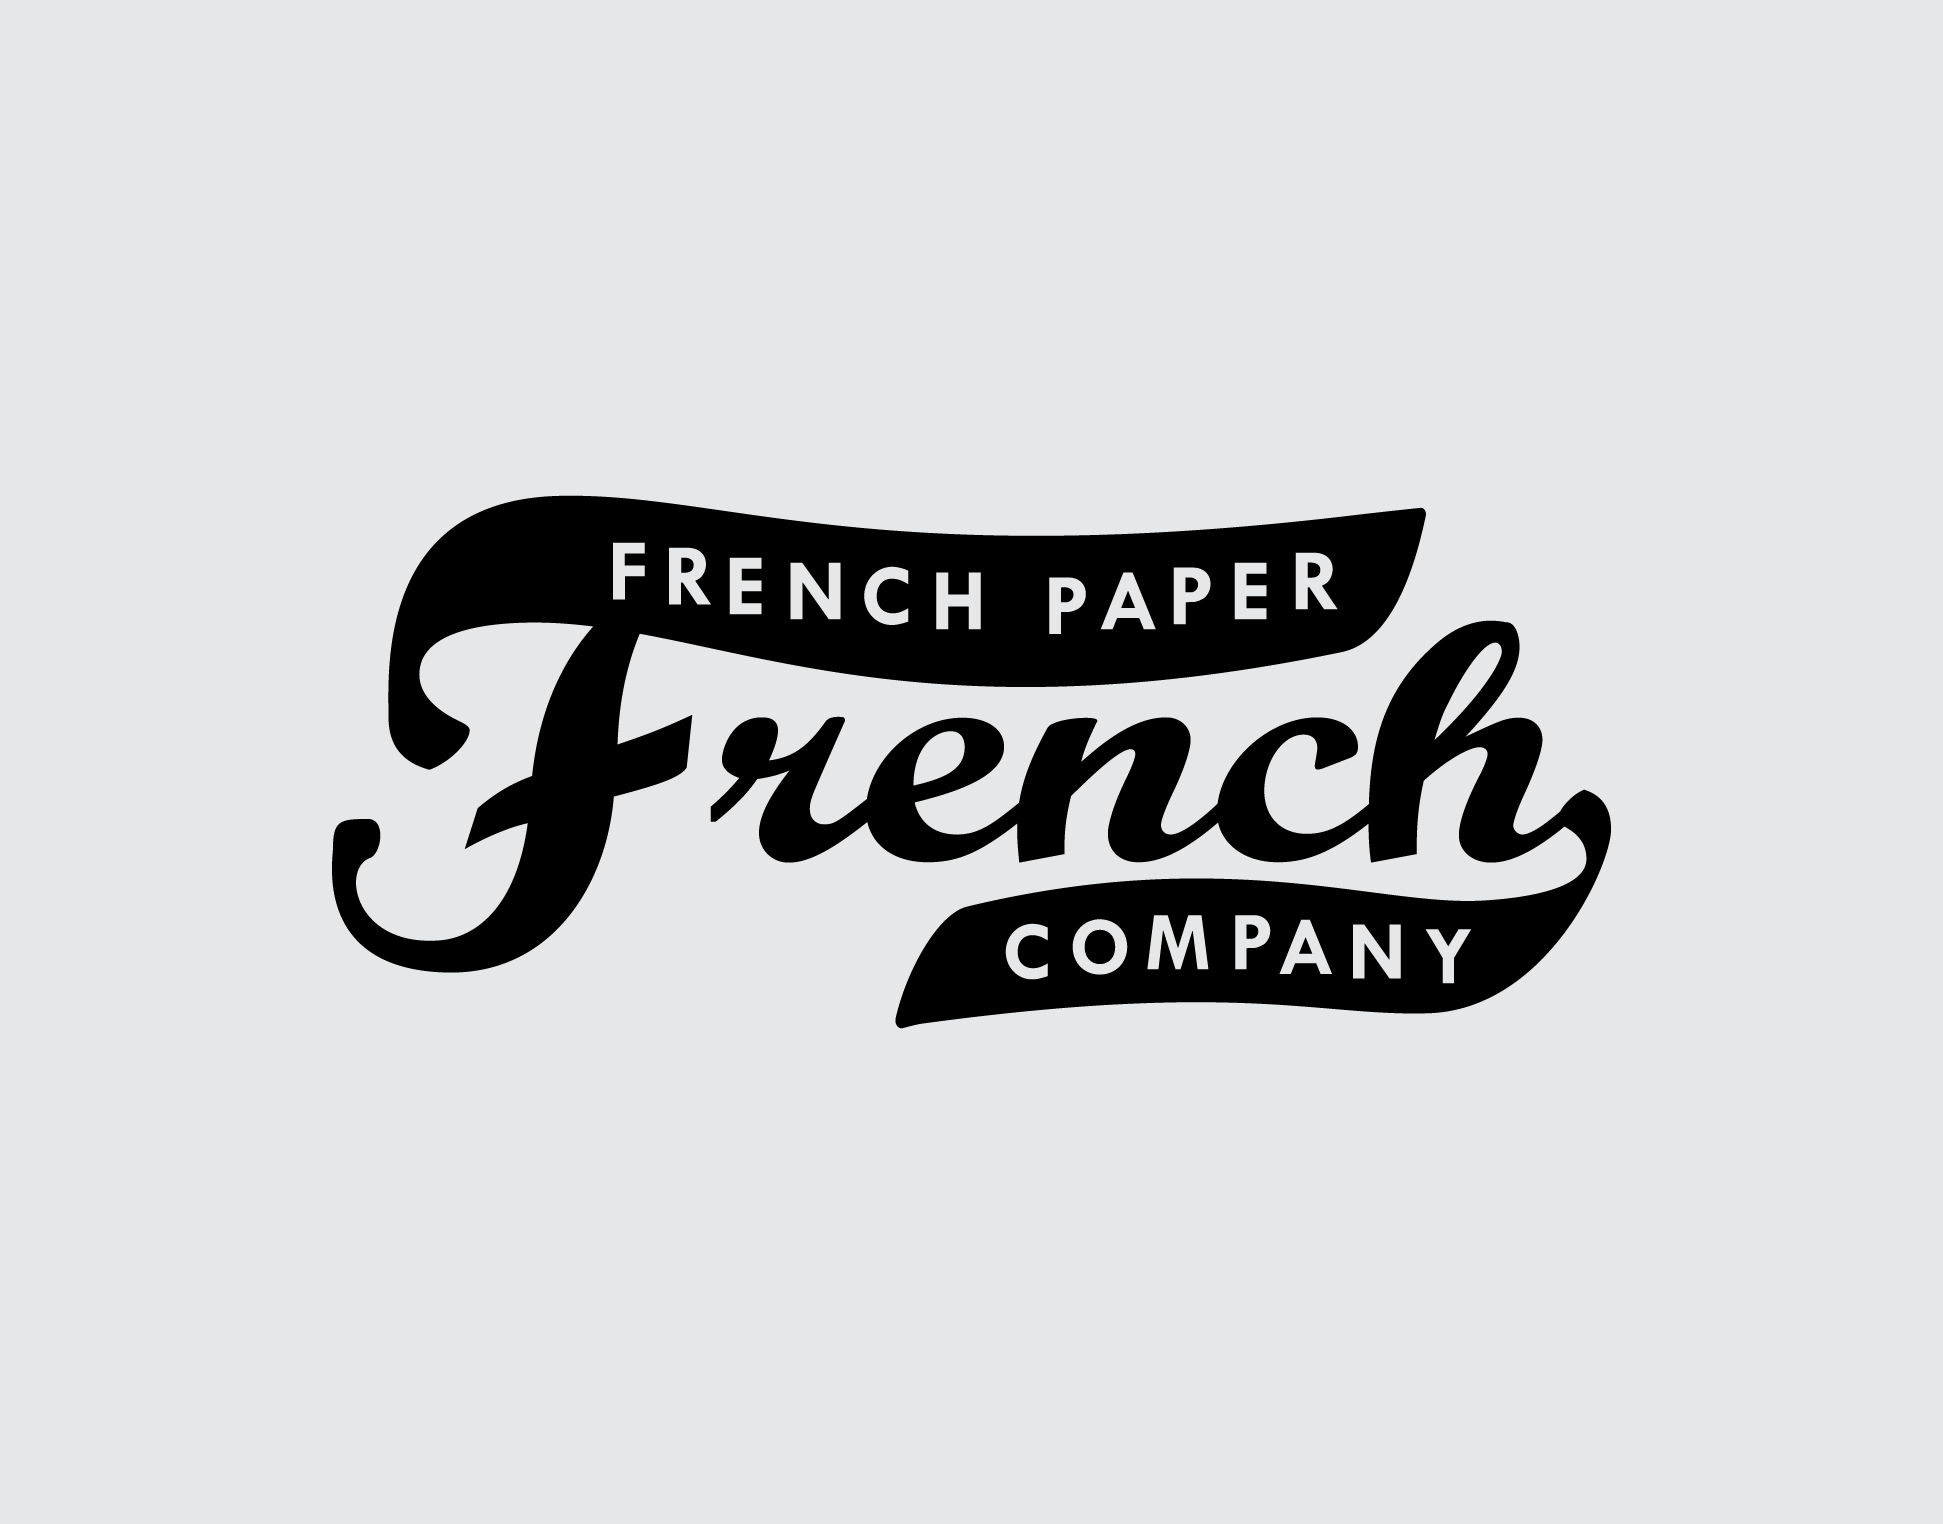 French Company Logo - About French Paper - Logos